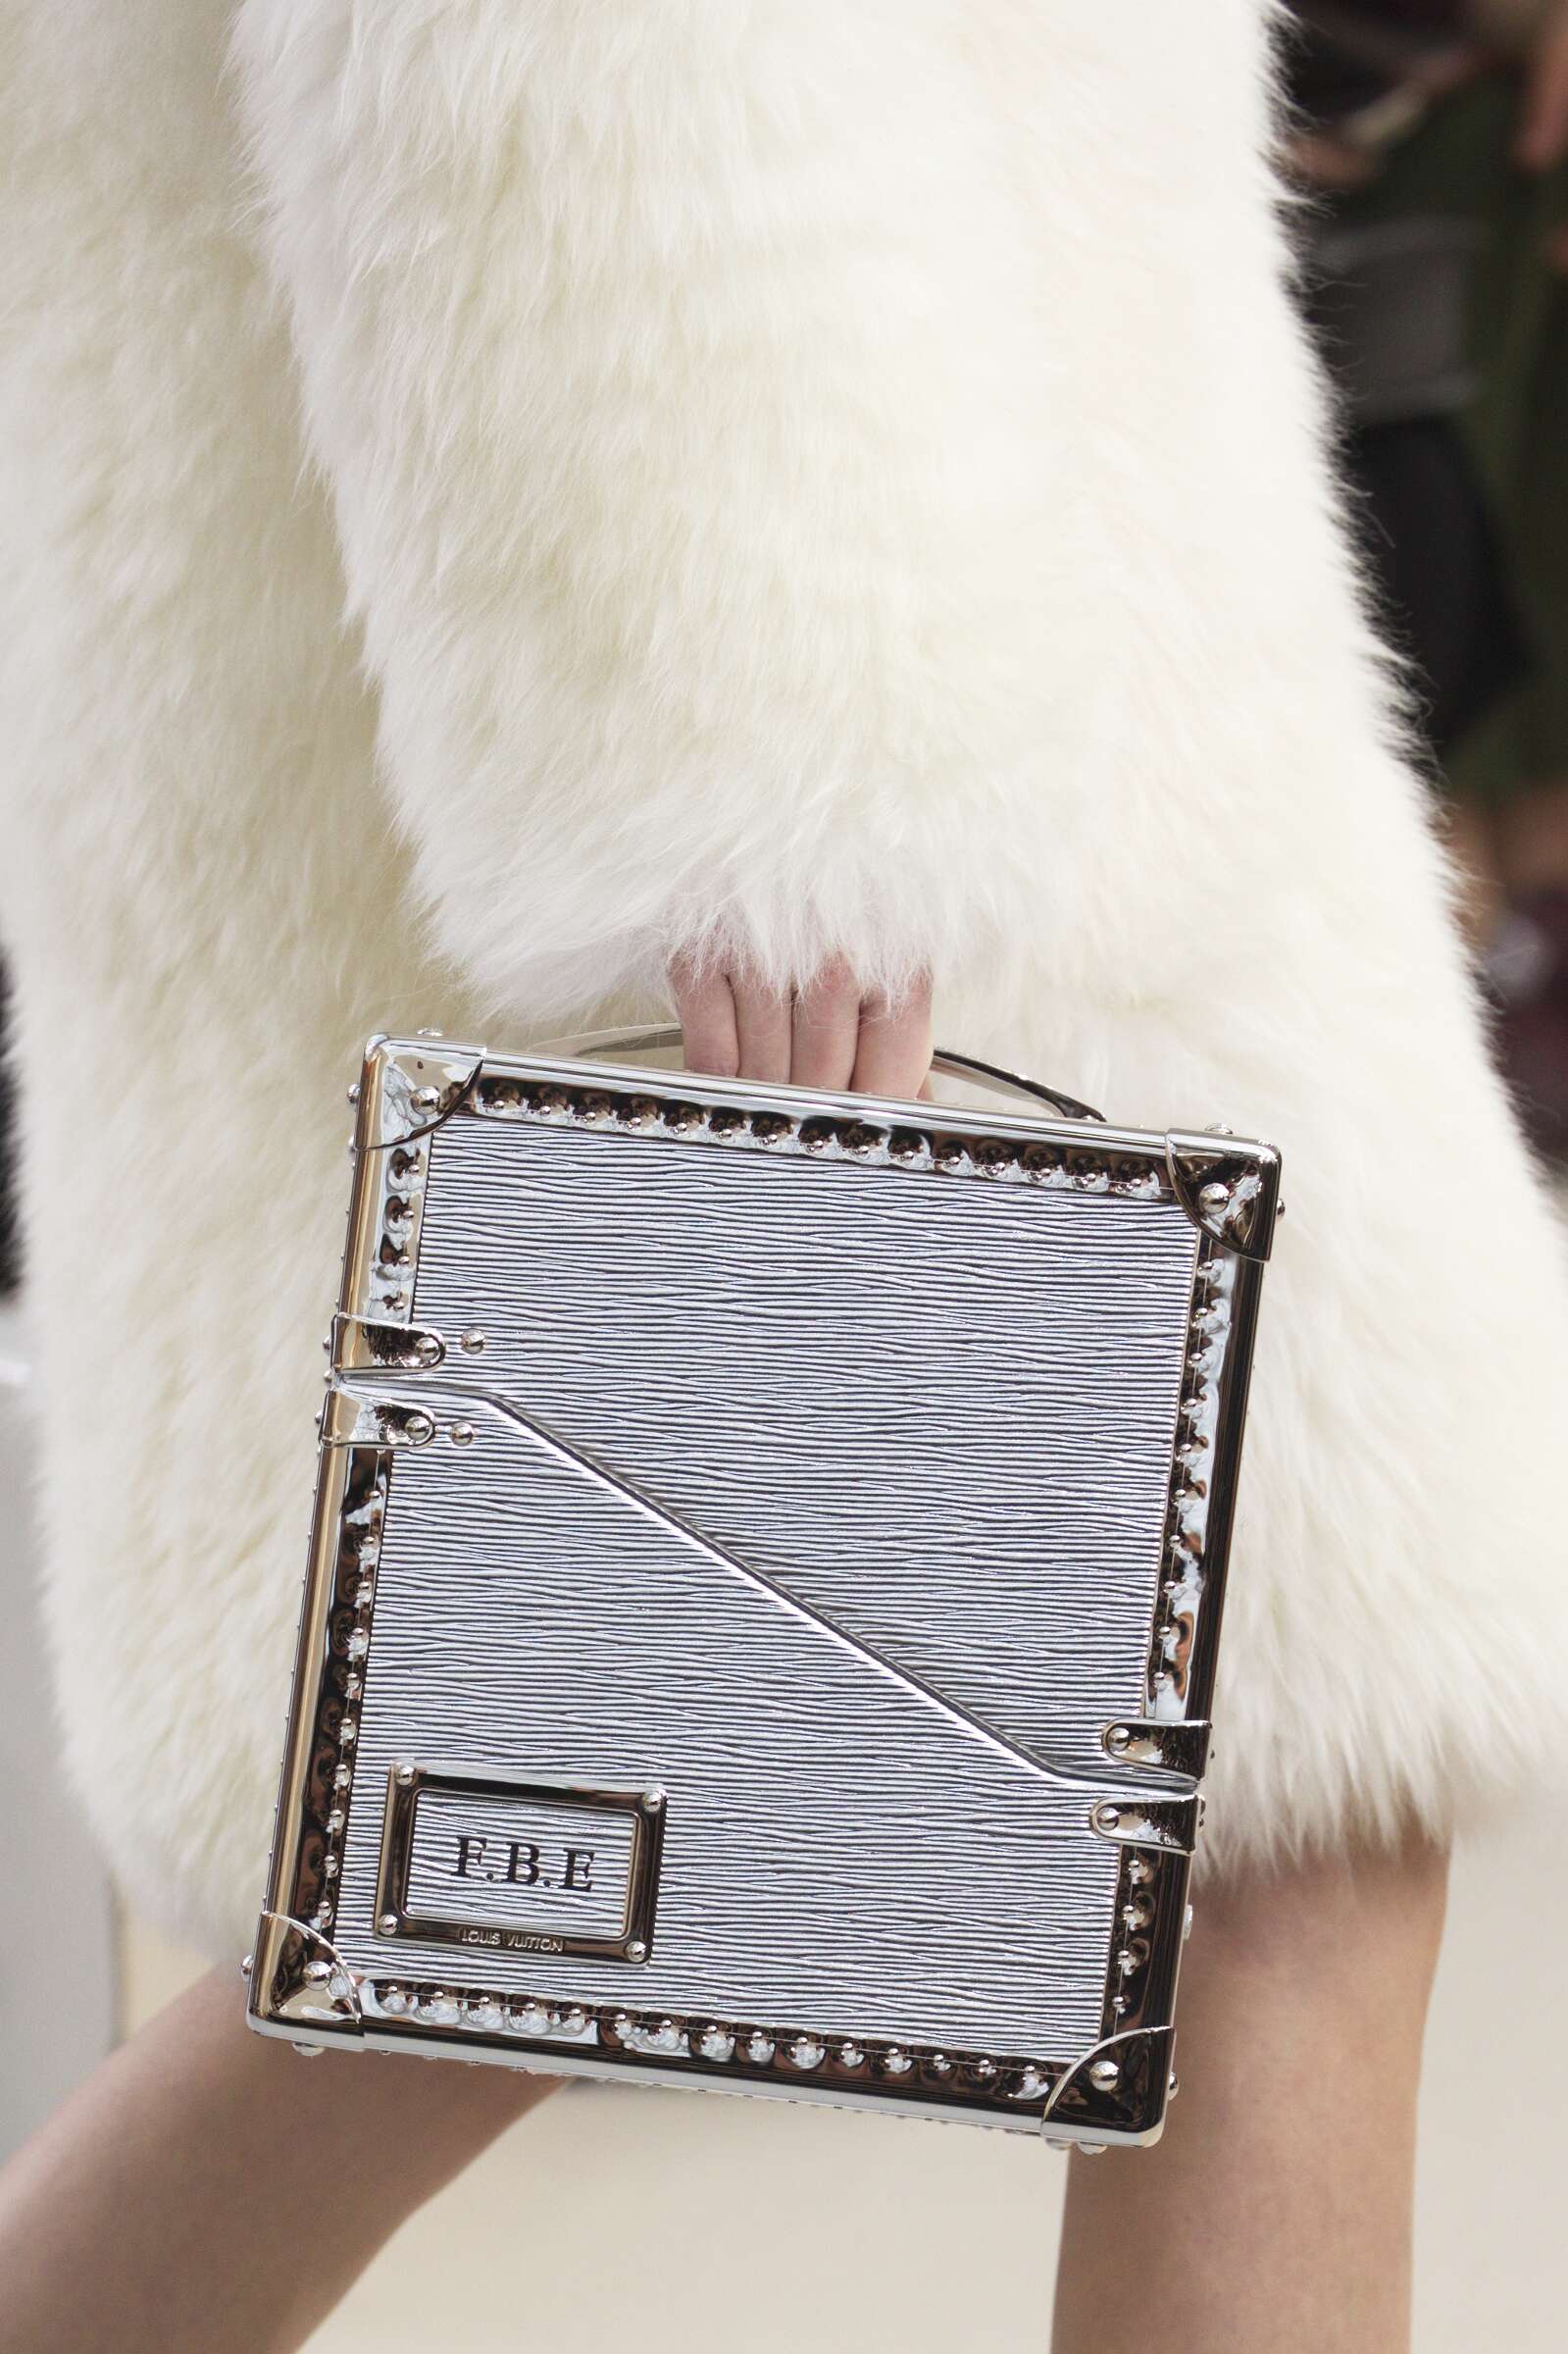 LOUIS VUITTON FALL WINTER 2015-16 WOMEN’S COLLECTION DETAILS | The Skinny Beep